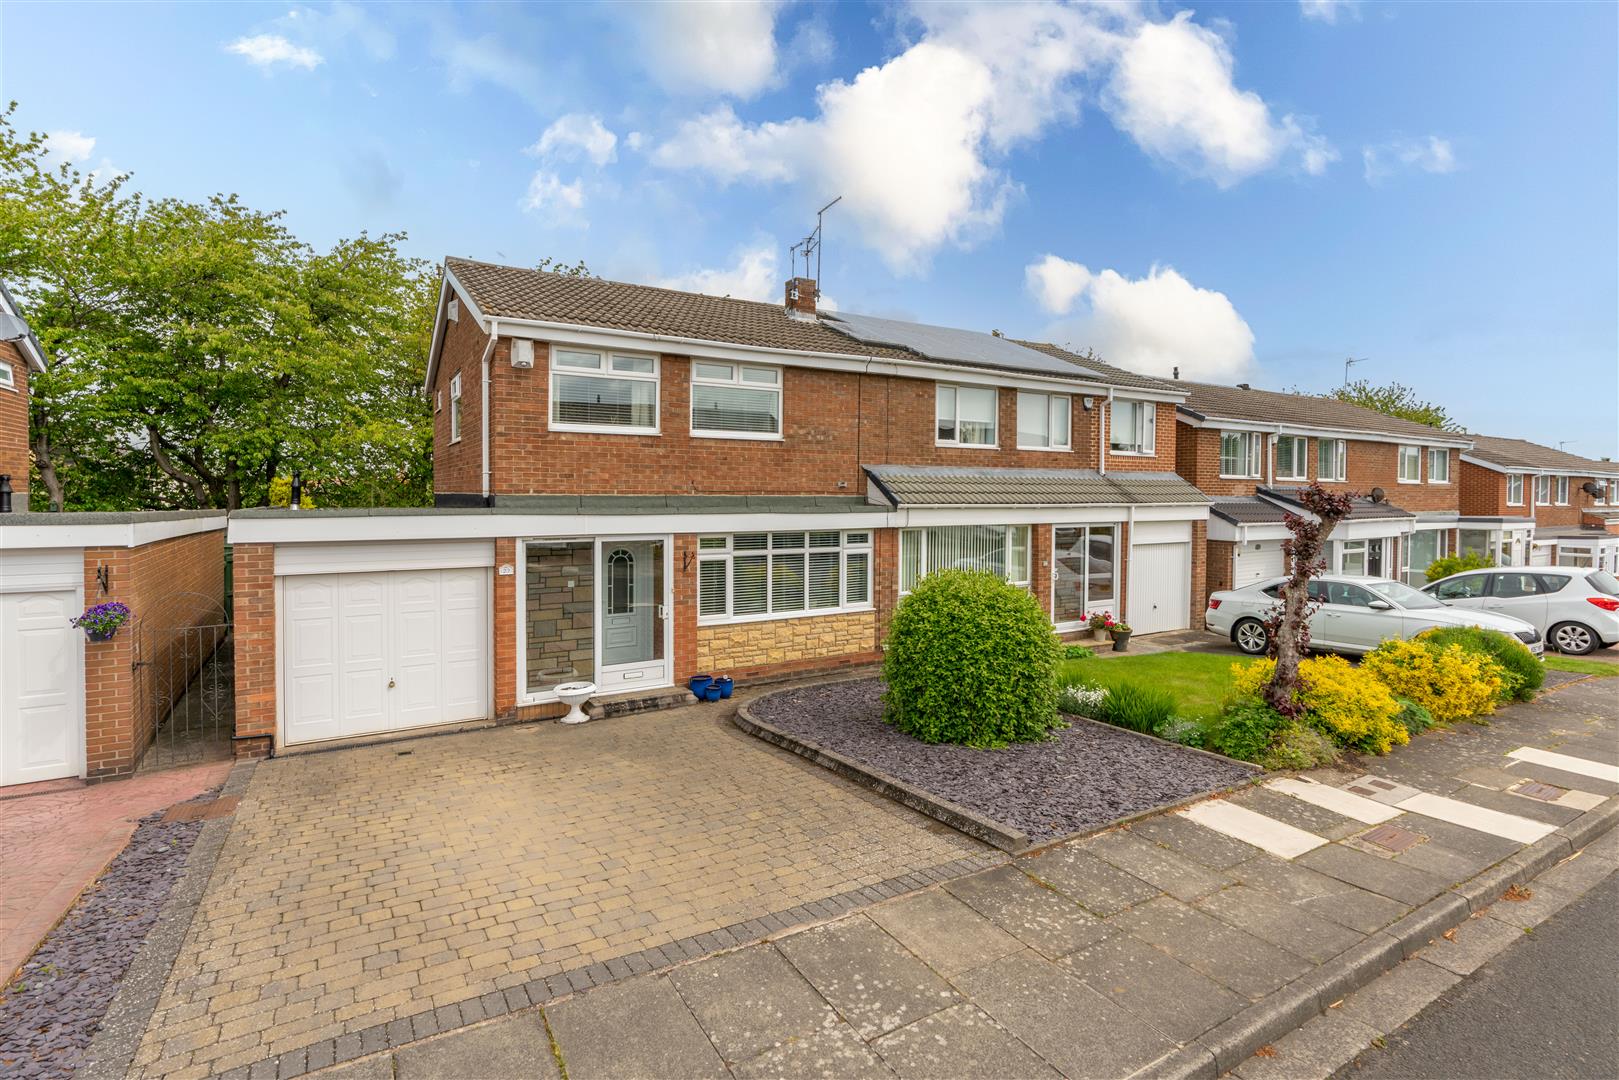 3 bed semi-detached house for sale in Farn Court, Newcastle Upon Tyne, NE3 